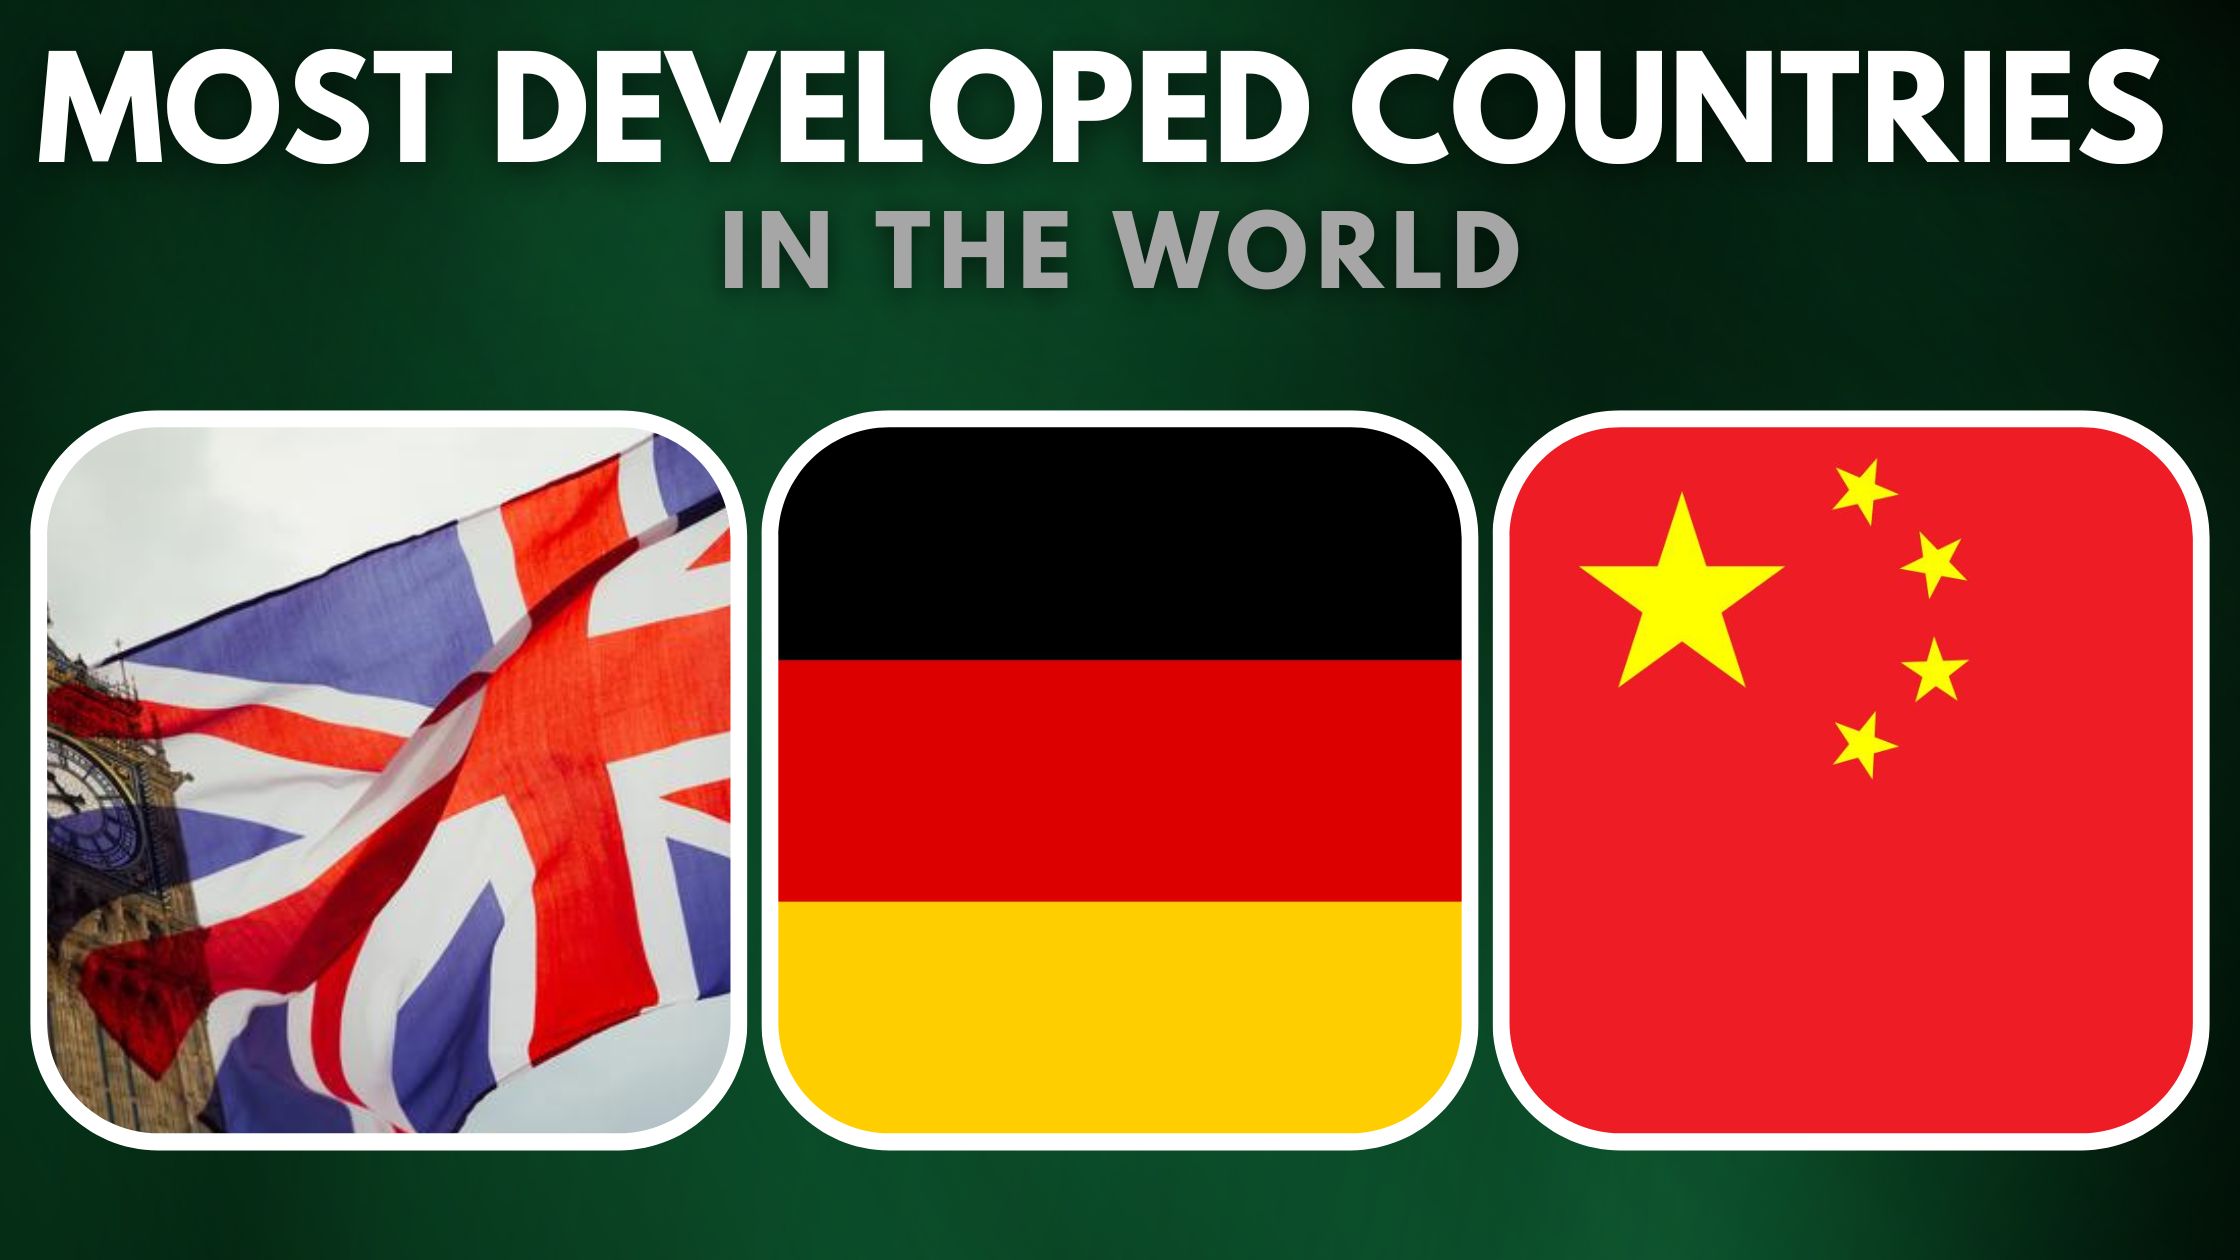 Top 10 Most Developed Countries in the World